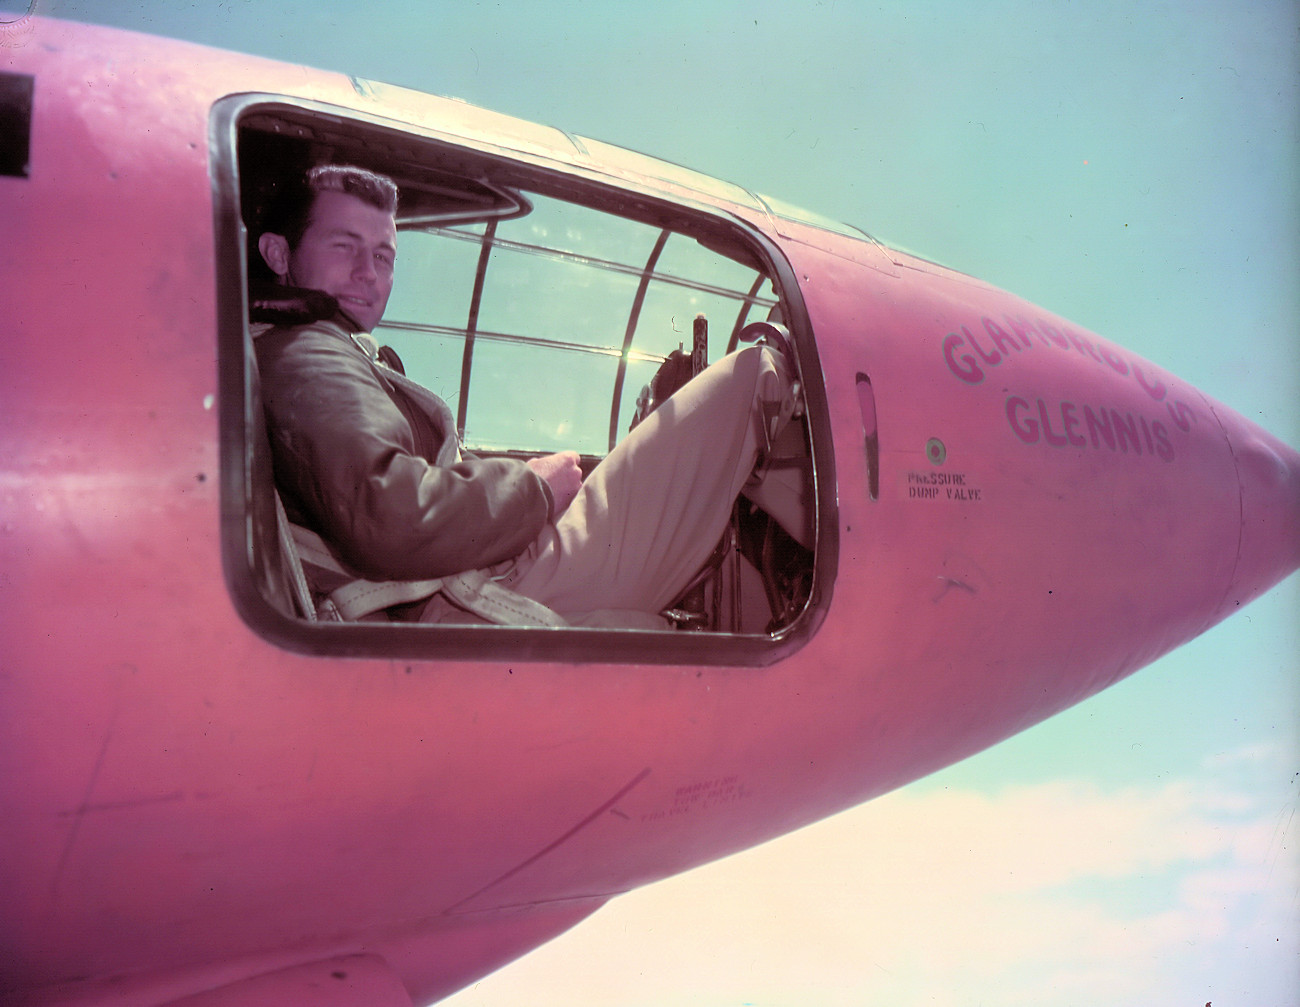 Bell X-1 Glamorous Glennis - Charles Chuck Yeager